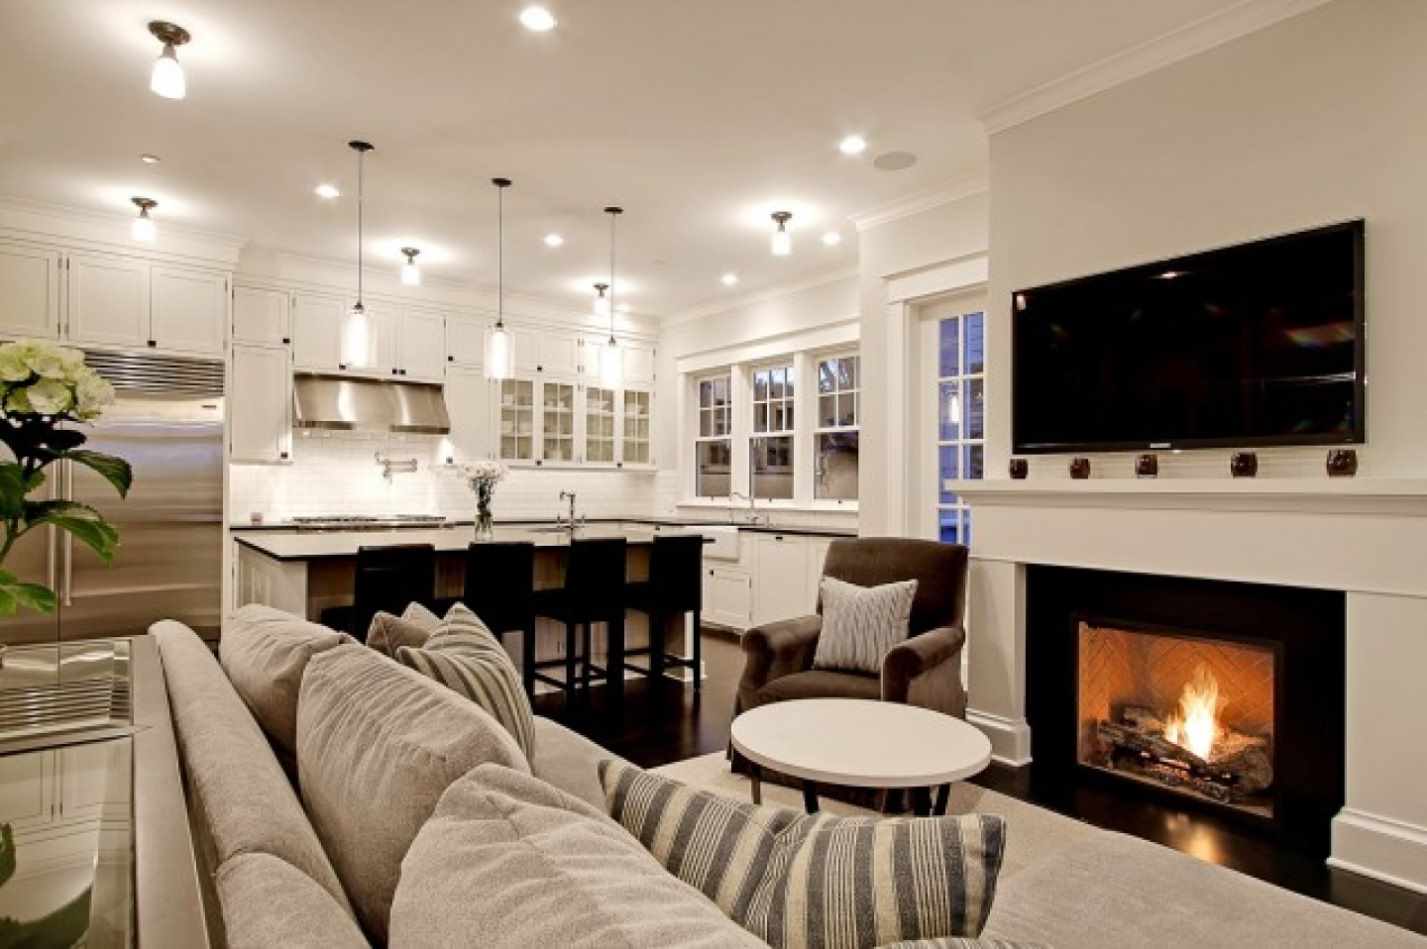 An example of applying a beautiful decor of a living room with a fireplace